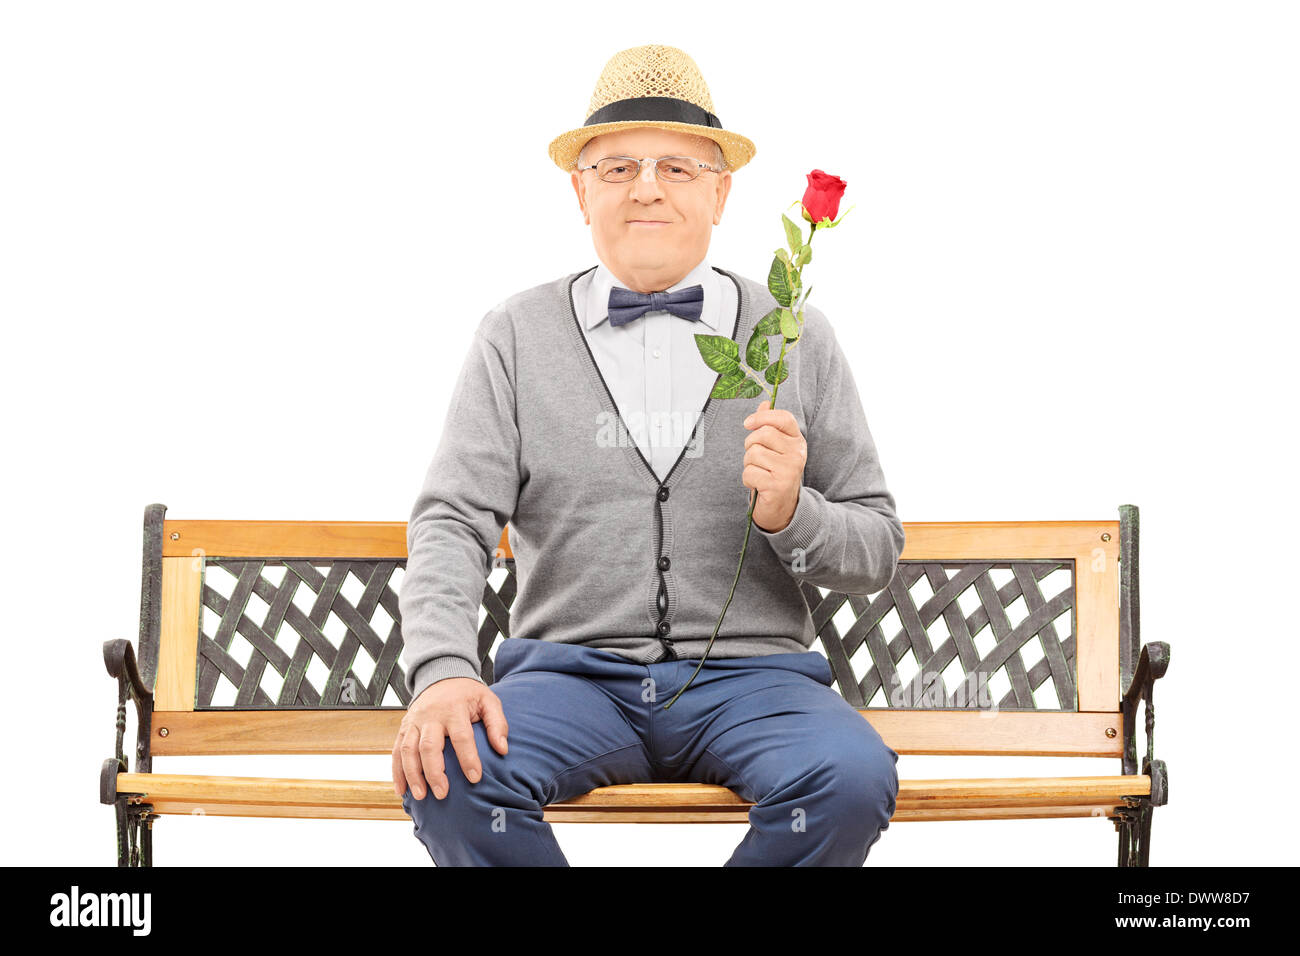 Gentleman holding a red rose seated on bench Stock Photo